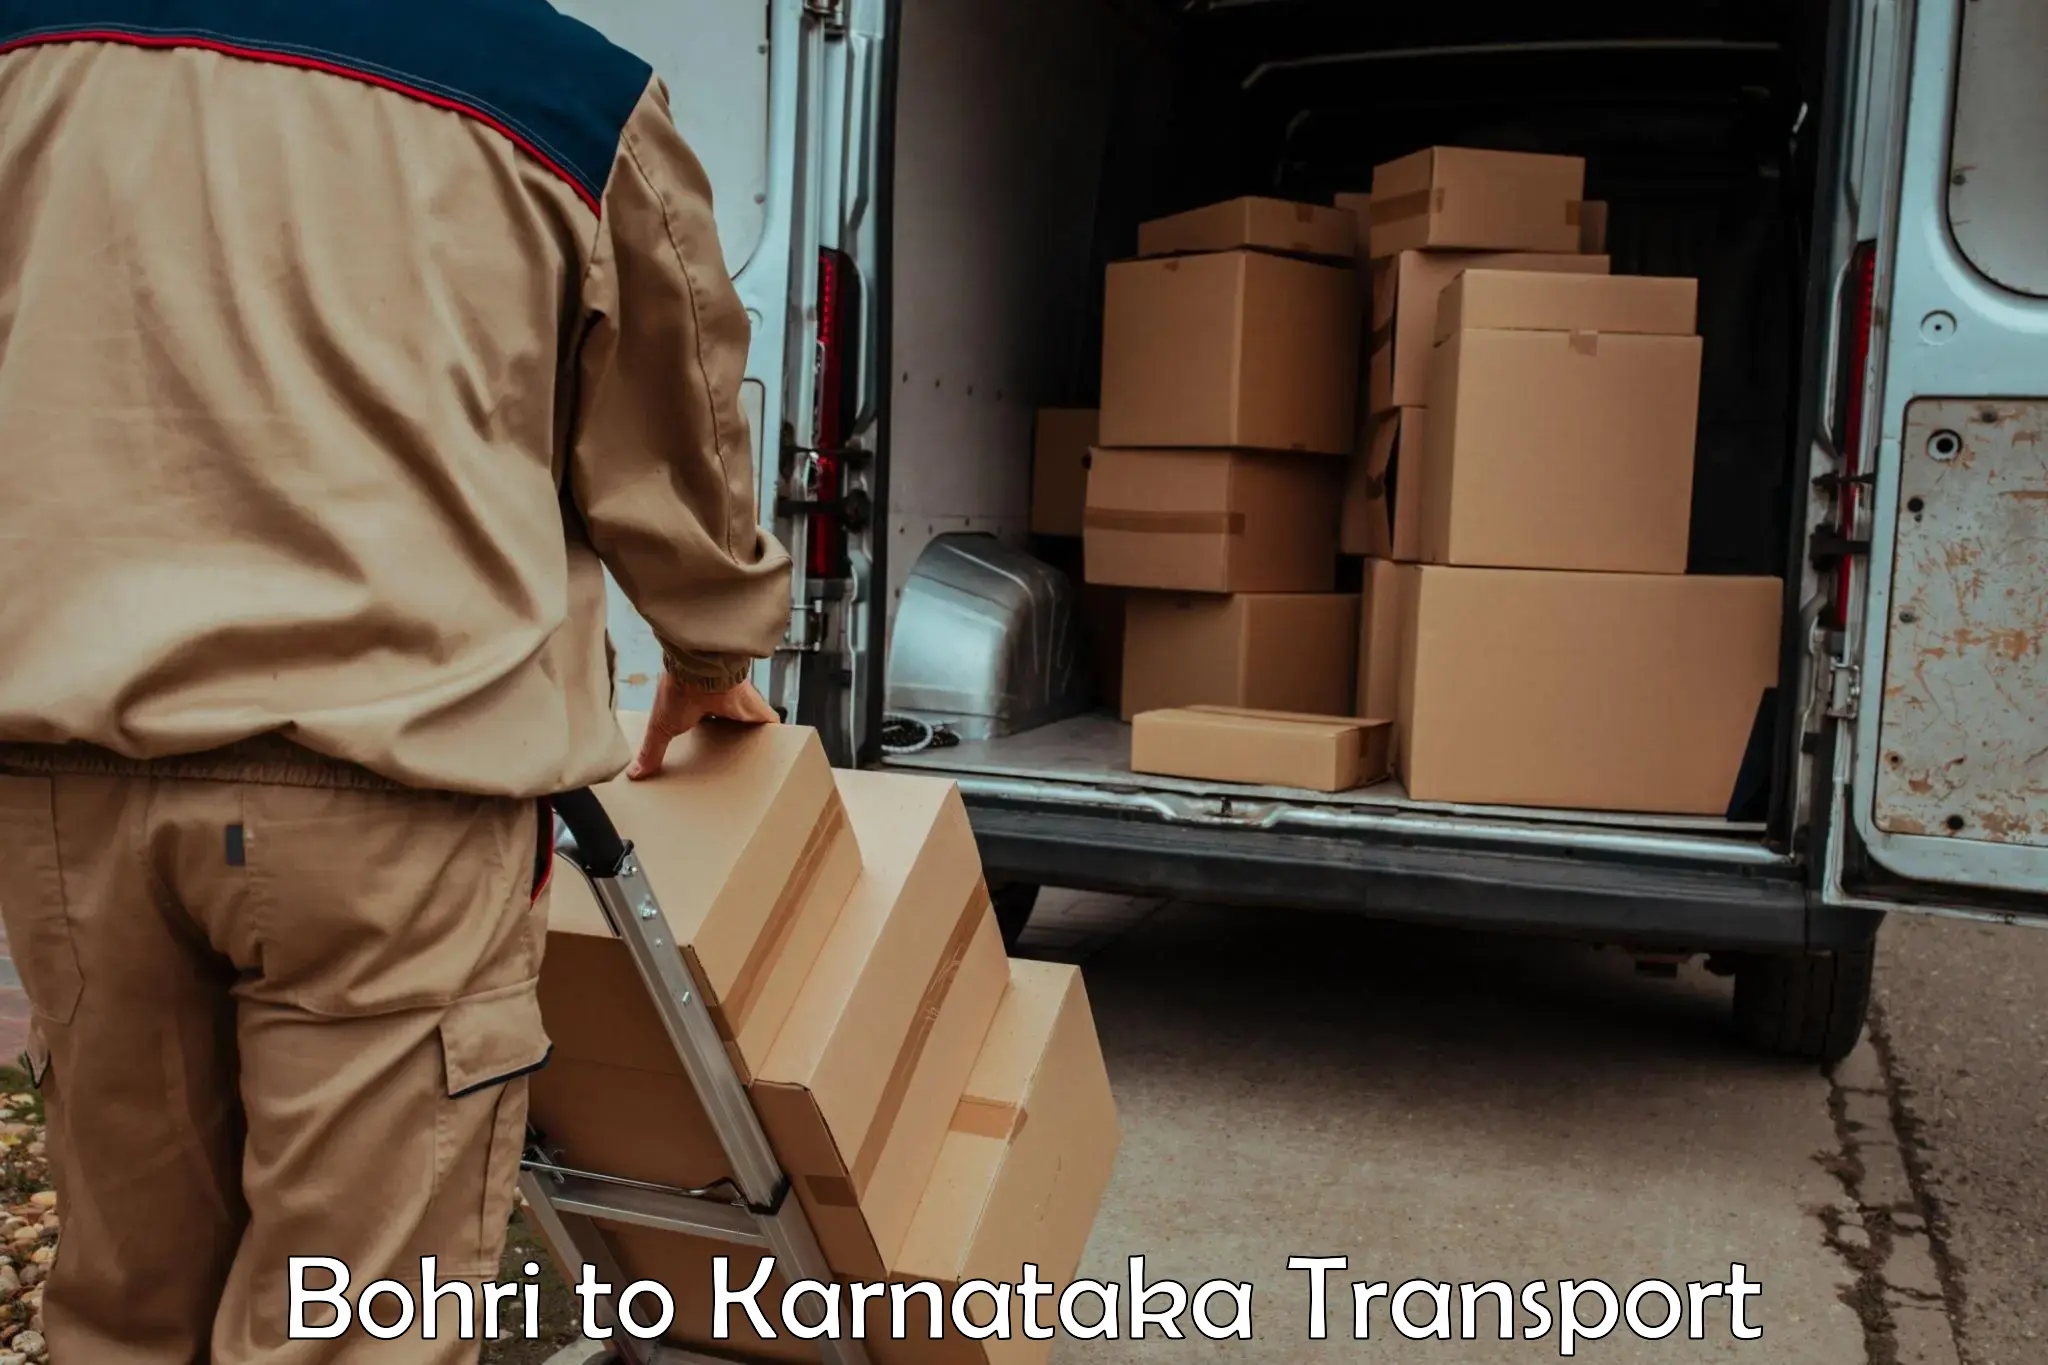 Transport bike from one state to another Bohri to Karnataka